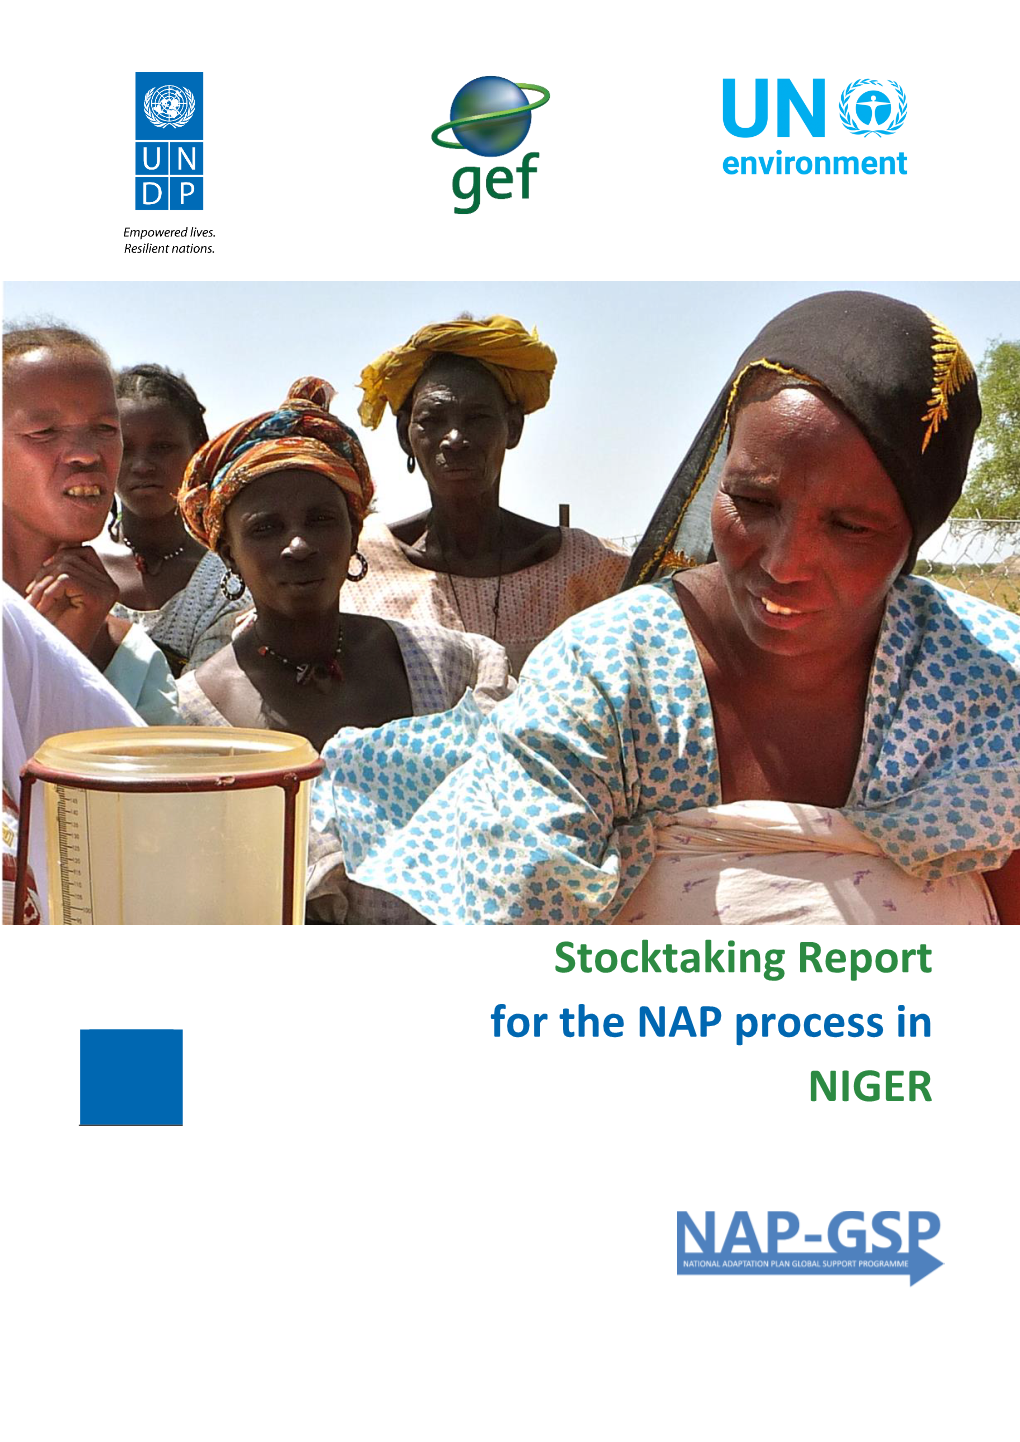 Stocktaking Report for the NAP Process in NIGER